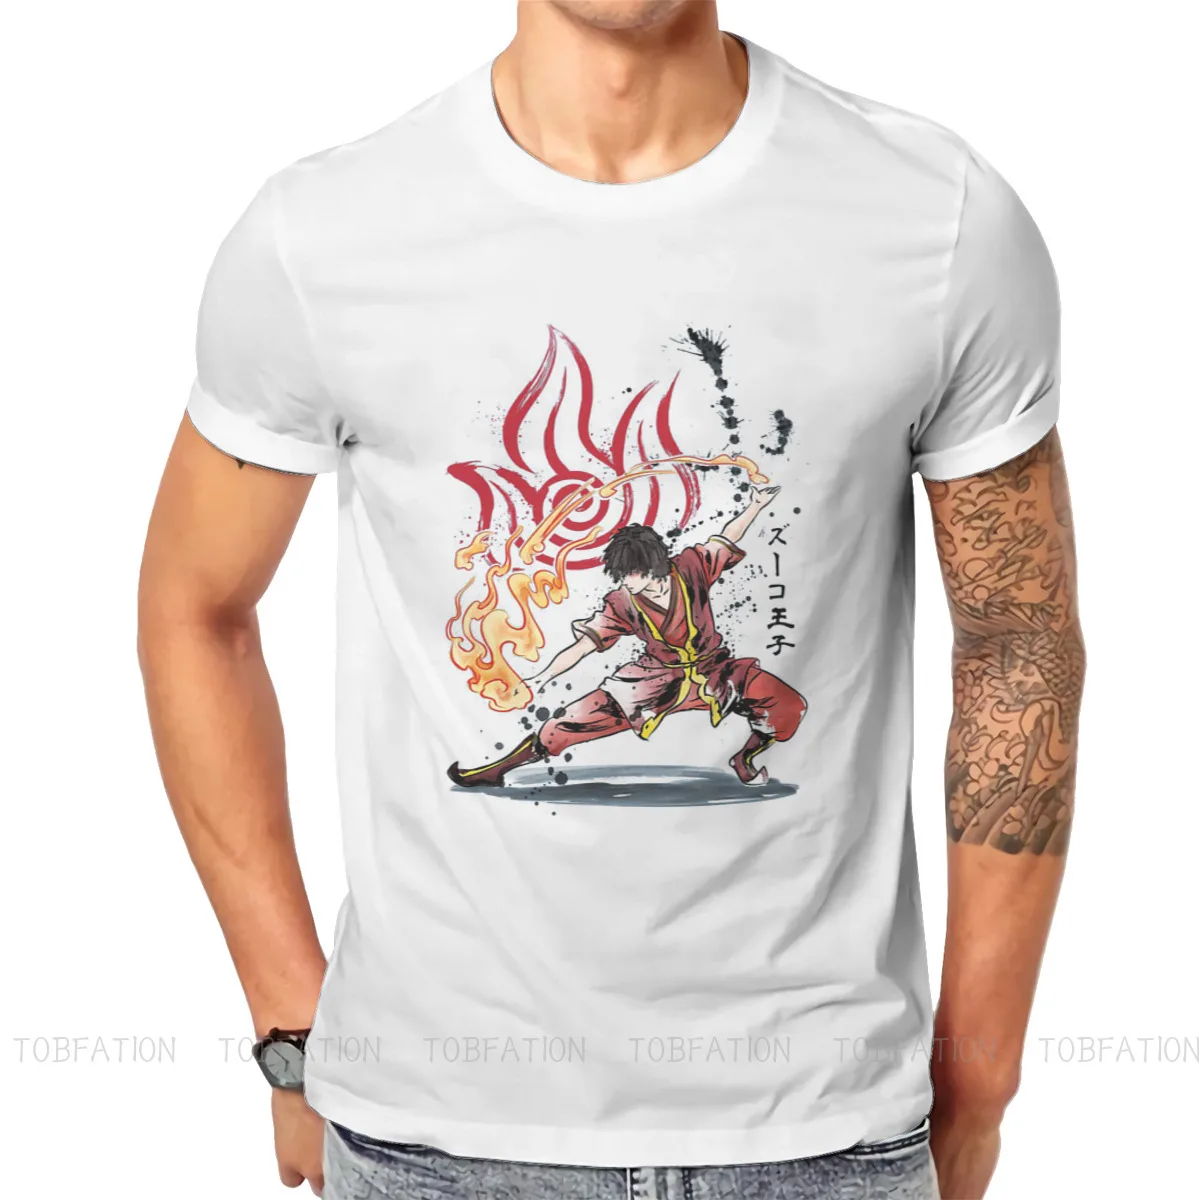 

Avatar the Last Airbender Anime The Power of Fire Nation T Shirt Classic Punk High Quality Tshirt Loose O-Neck Short Sleeve